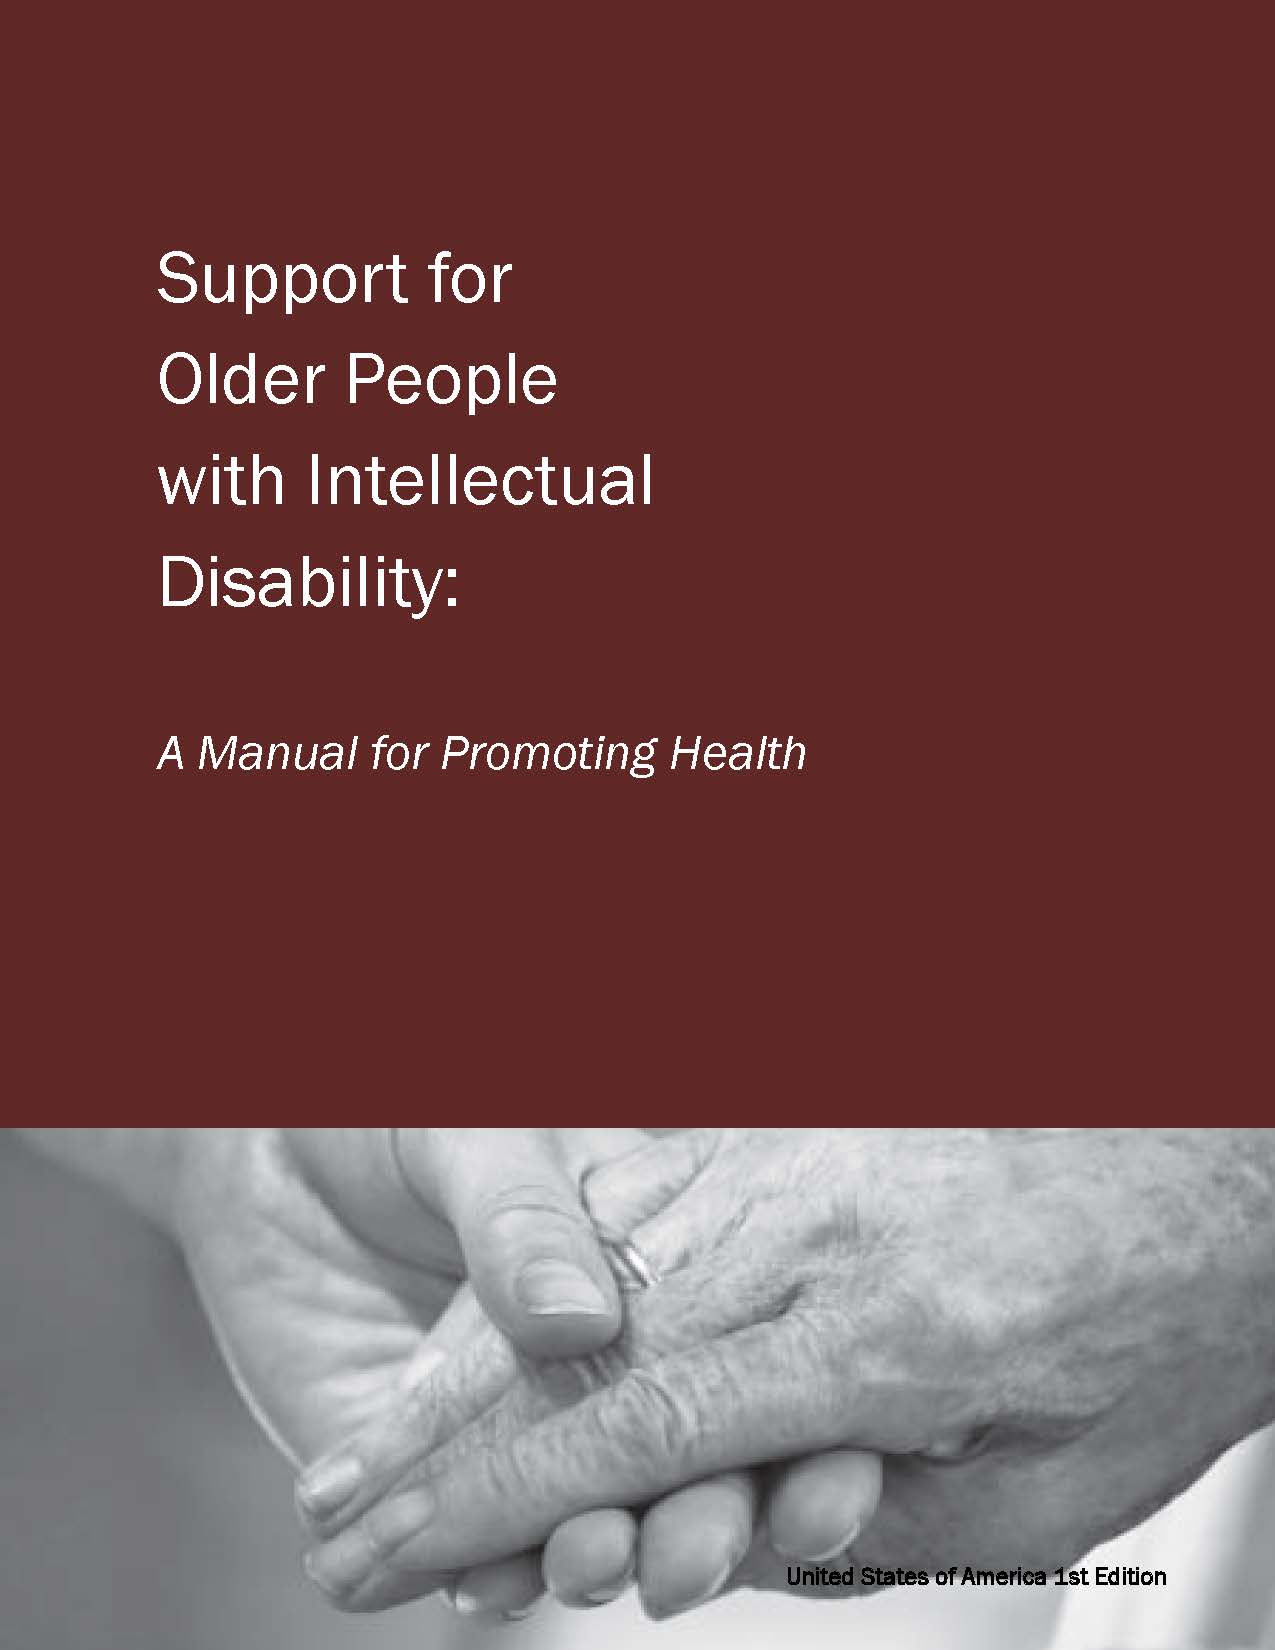 Support for Older People with Intellectual Disability - US